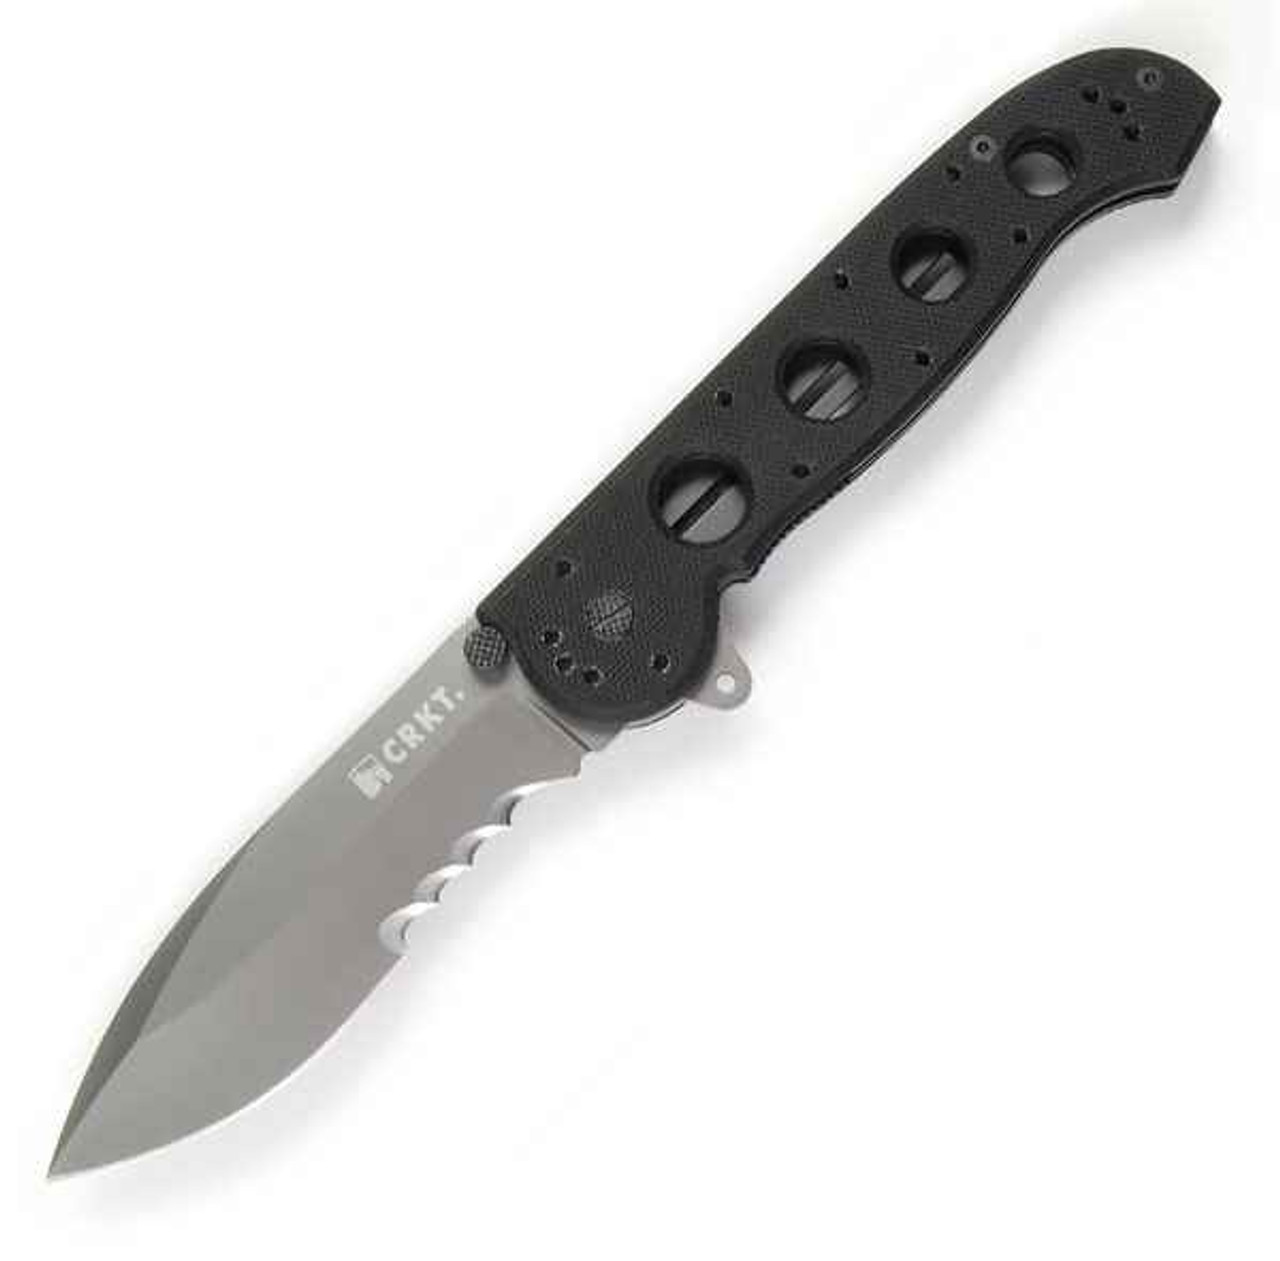 CRKT M21 (CR2114G) 3.88" 8Cr14MoV Black TiNi Finished Spear Point Partially Serrated Blade, Black G-10 Handle